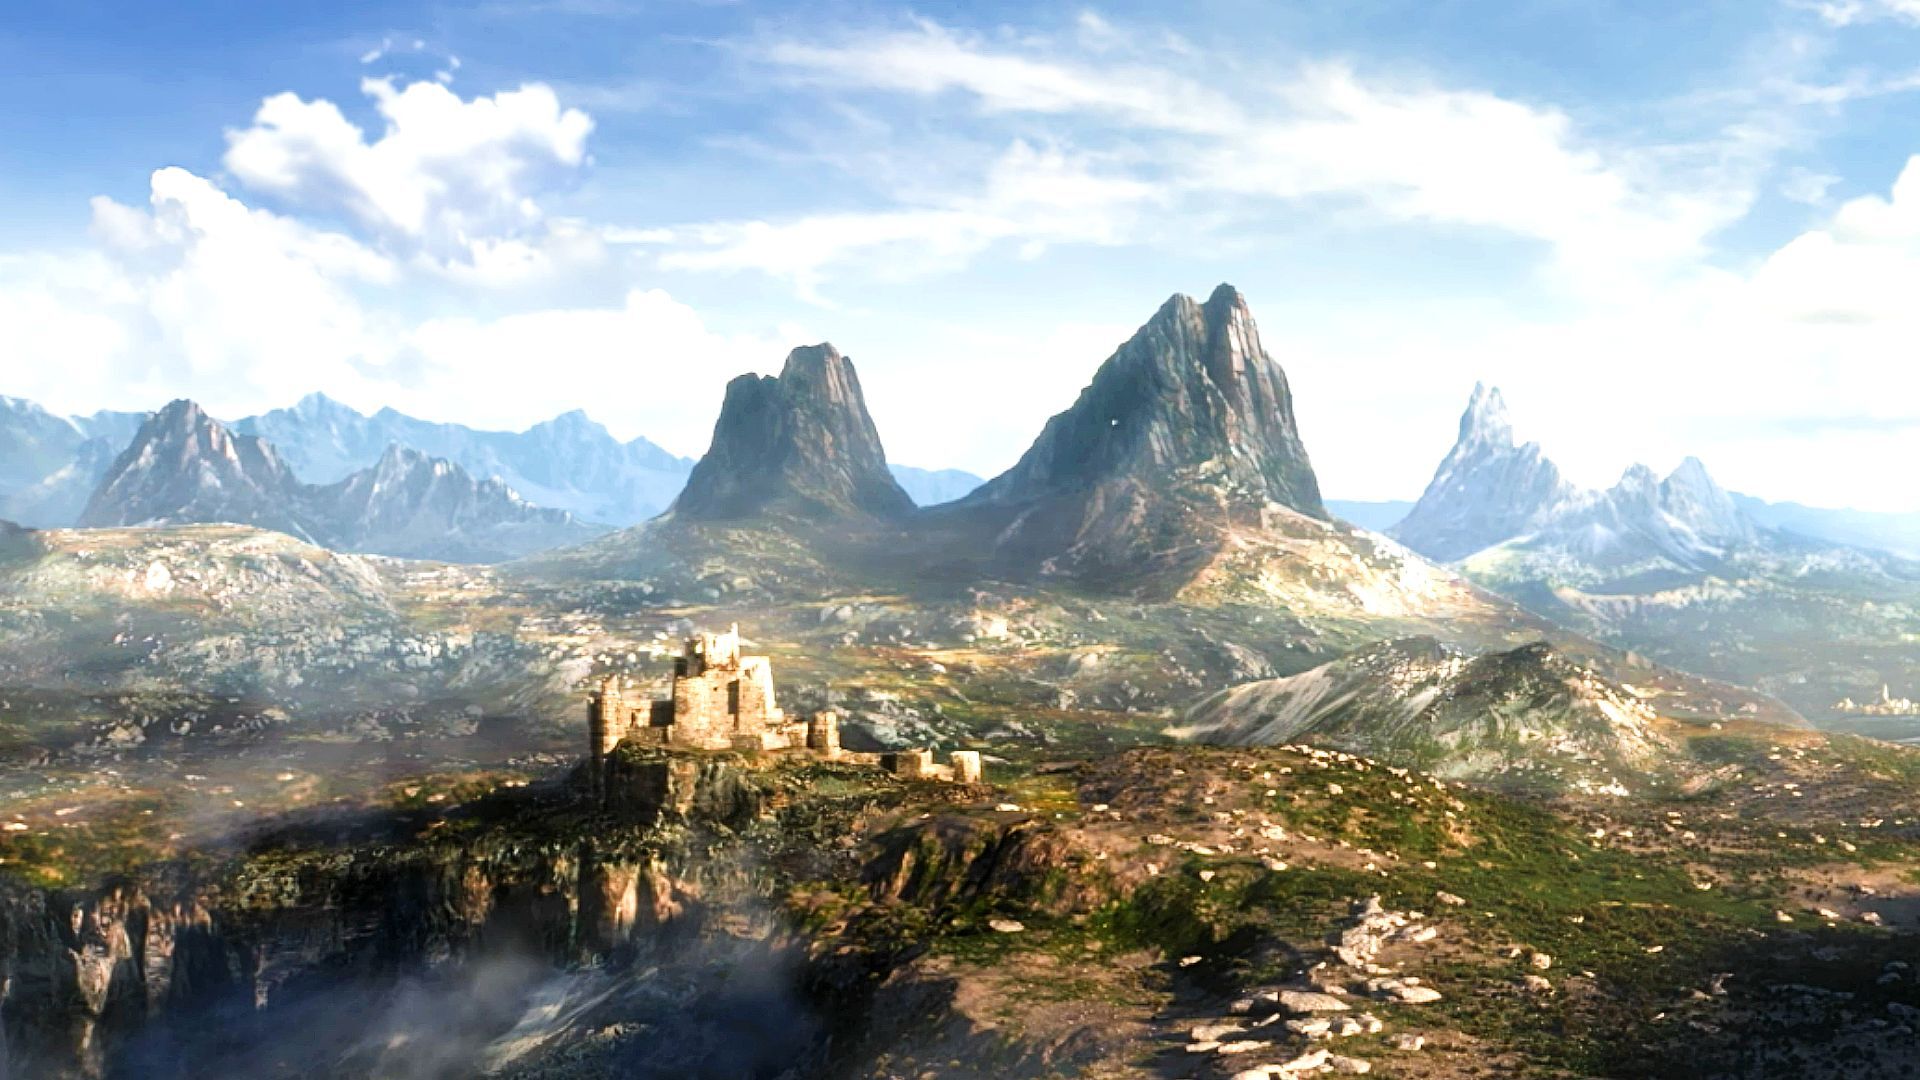 The Elder Scrolls 6 release date speculation, trailer and rumours